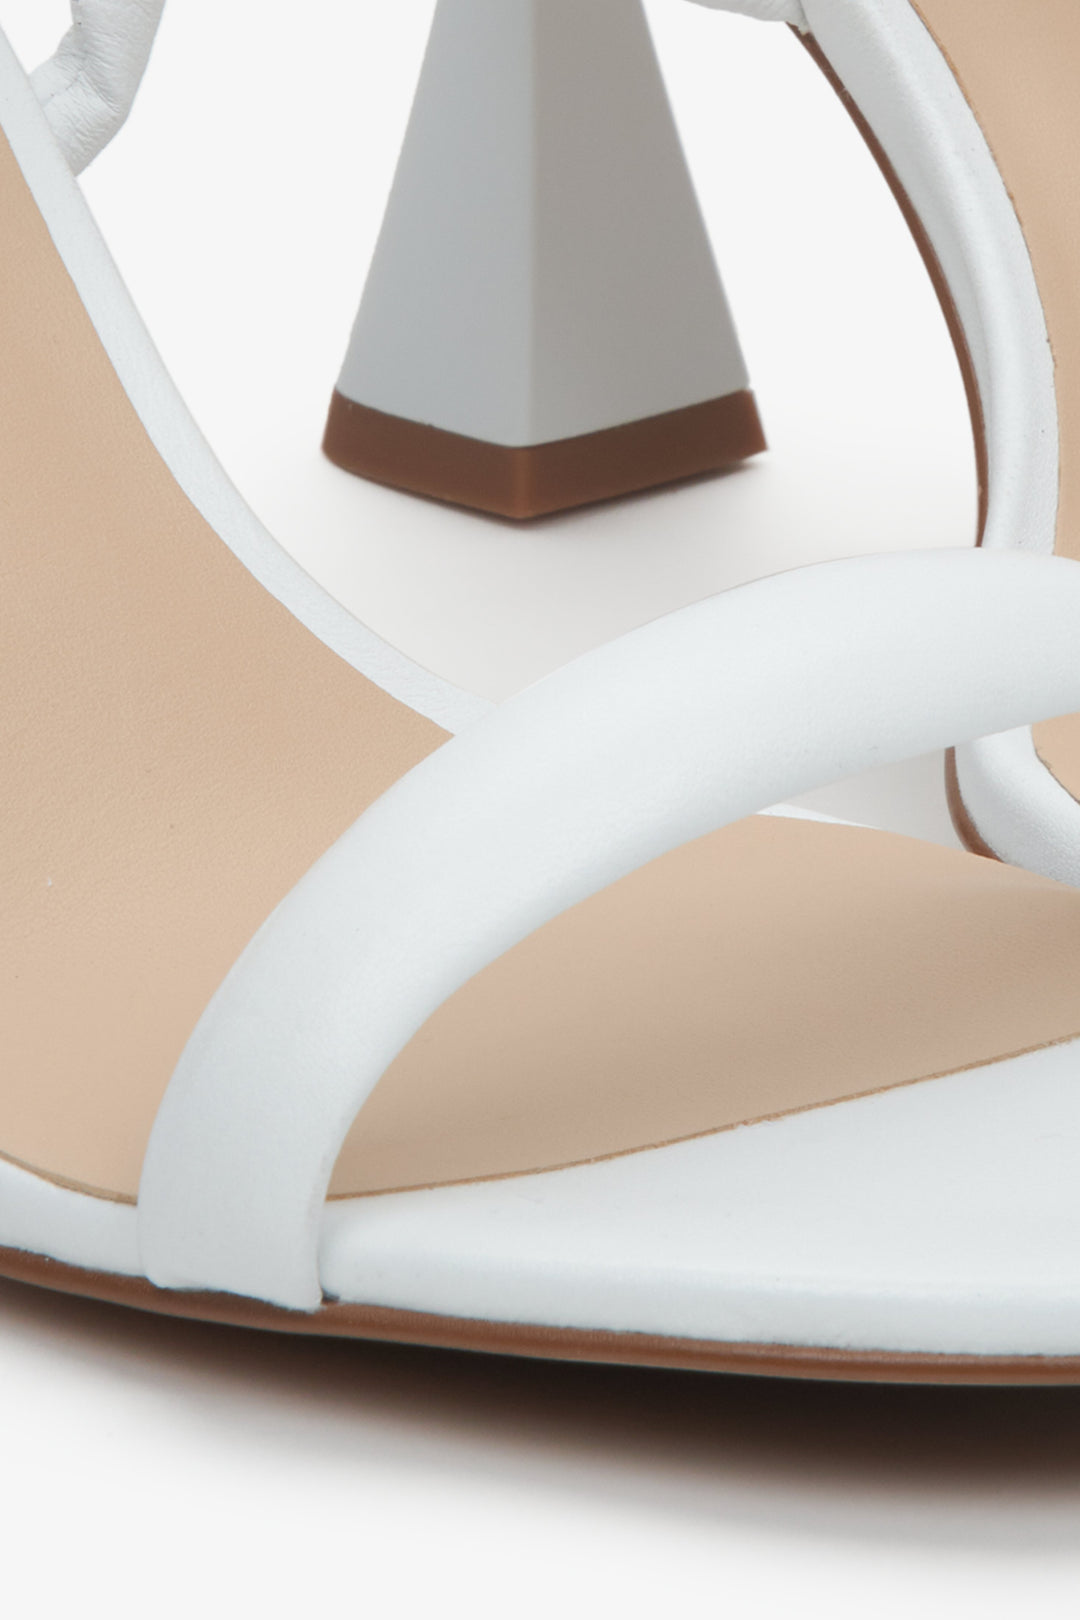 Women's white strappy sandals on a funnel heel, Estro brand. Close-up on details.